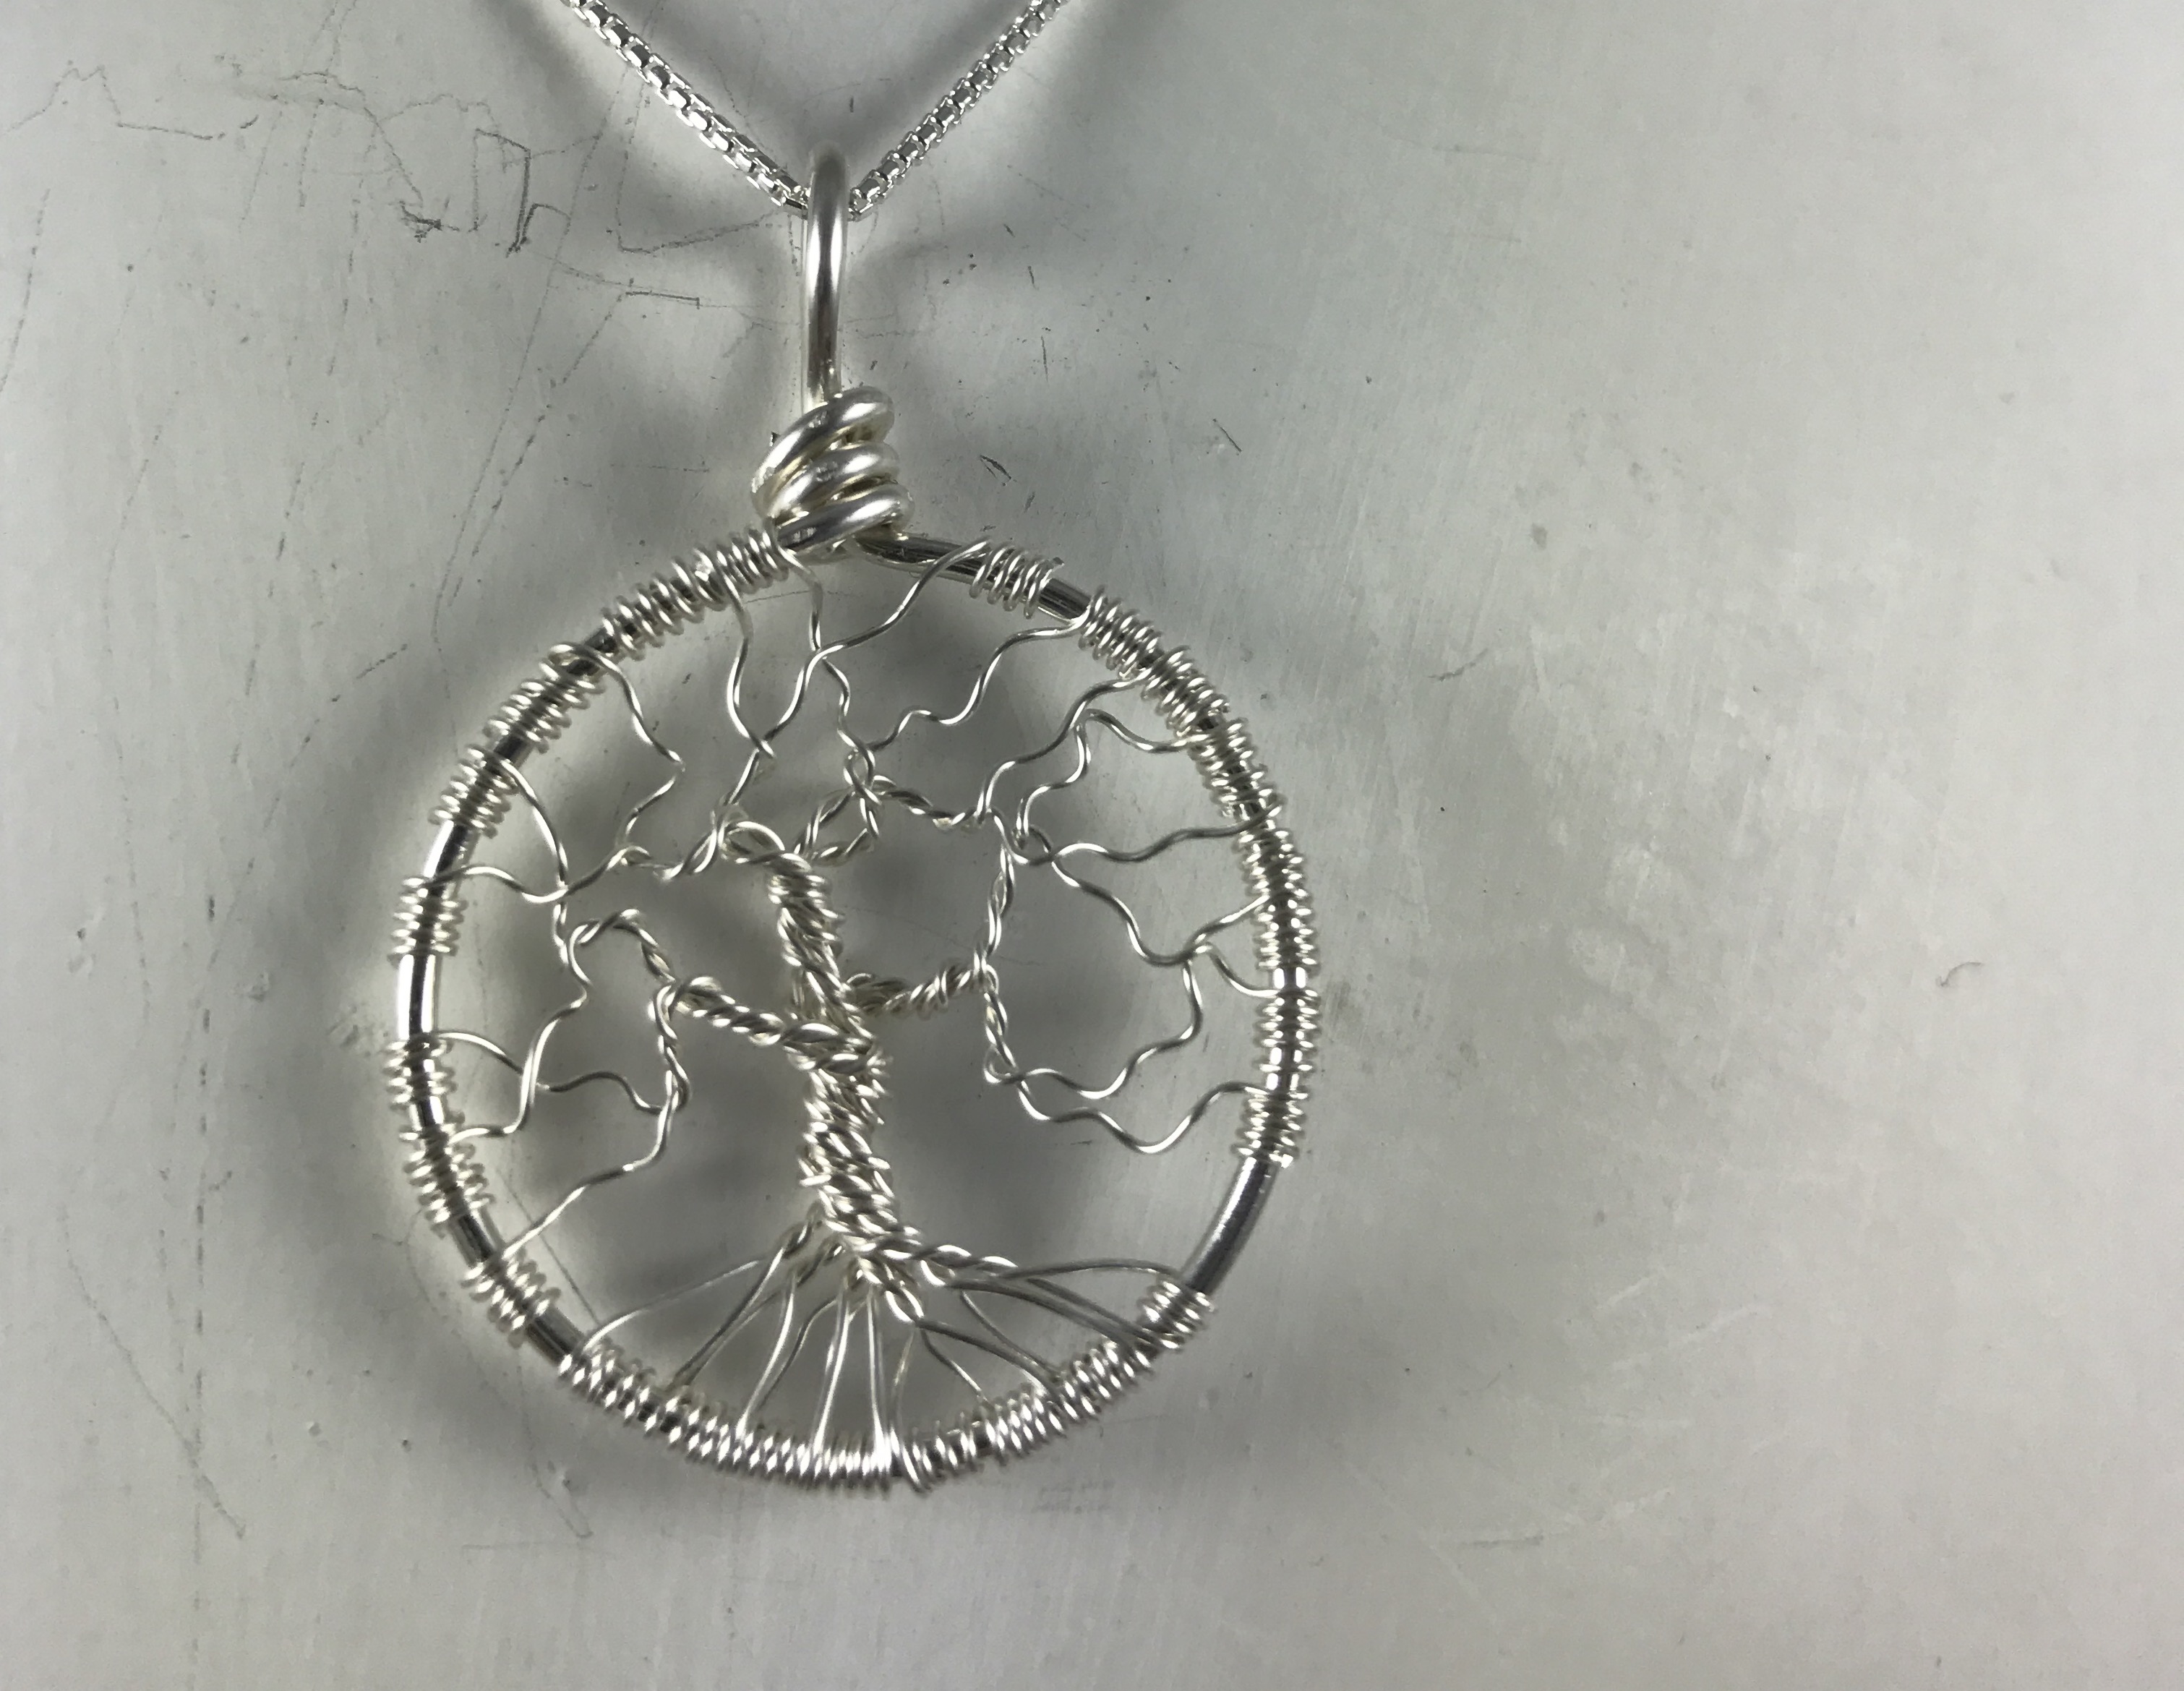 Creative Expressions - Tree of Life Pendant - Silver Wire